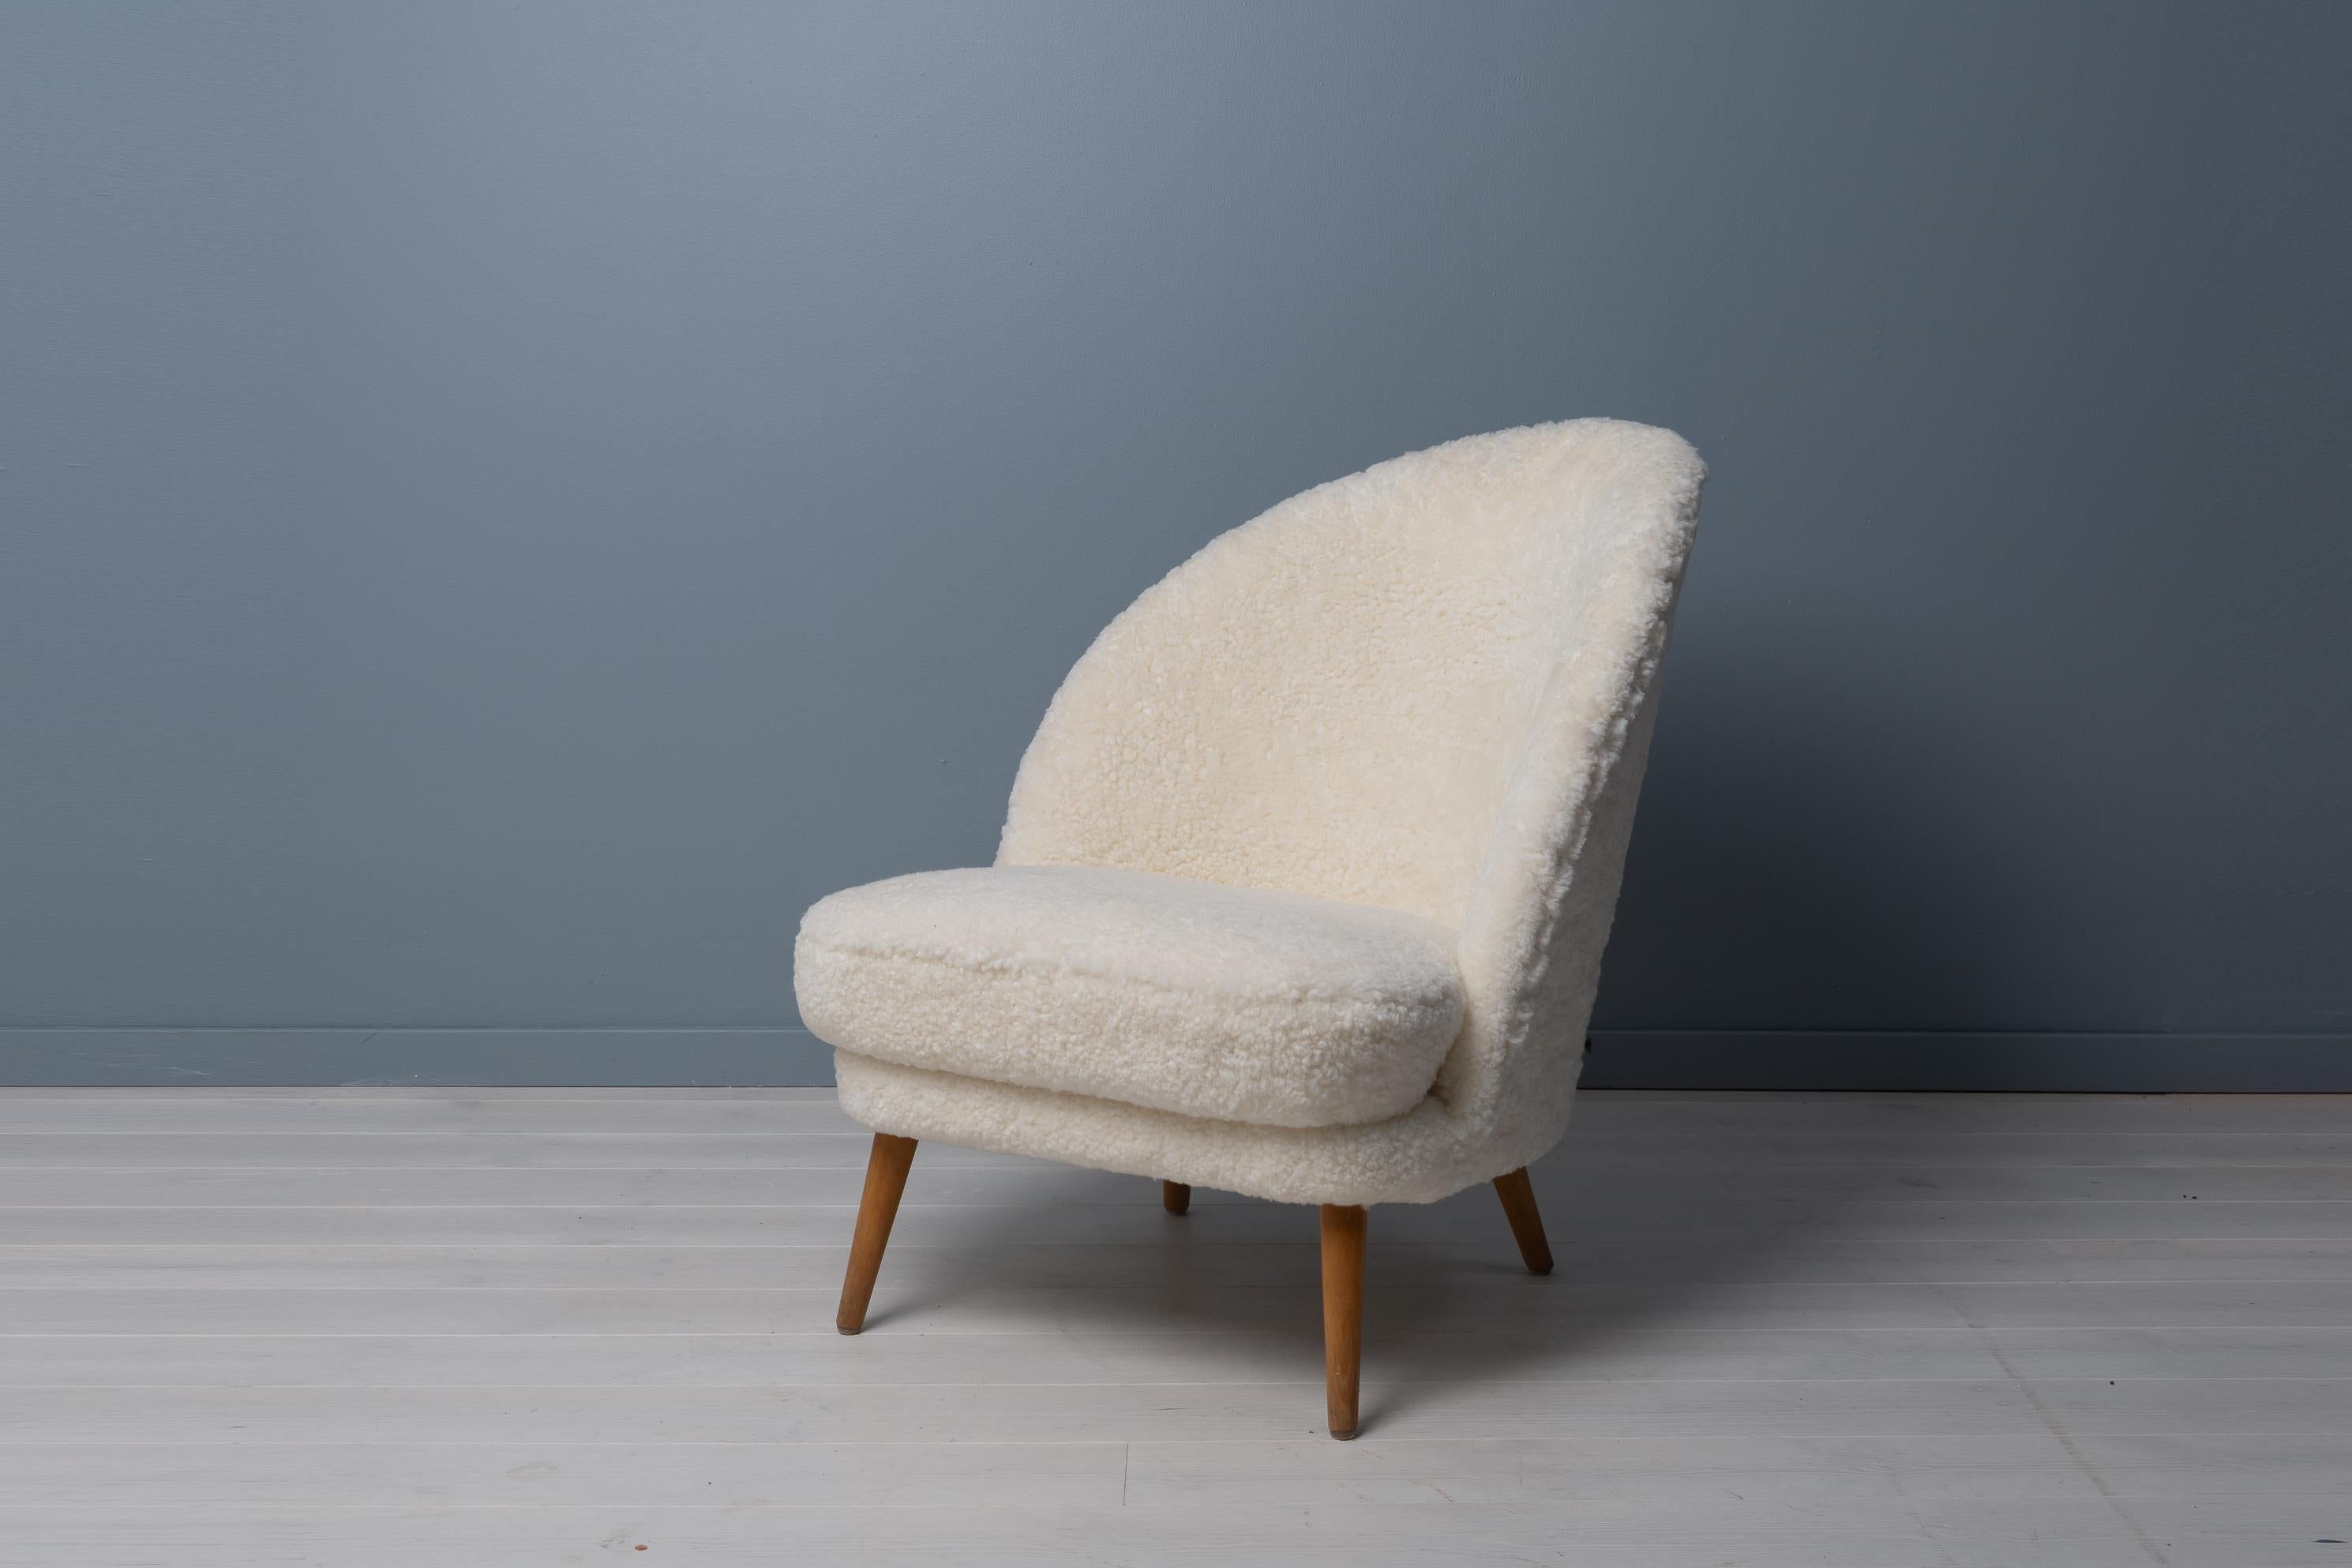 20th Century Scandinavian Modern Swedish White Sheepskin Easy Chair Attributed to Arne Norell For Sale